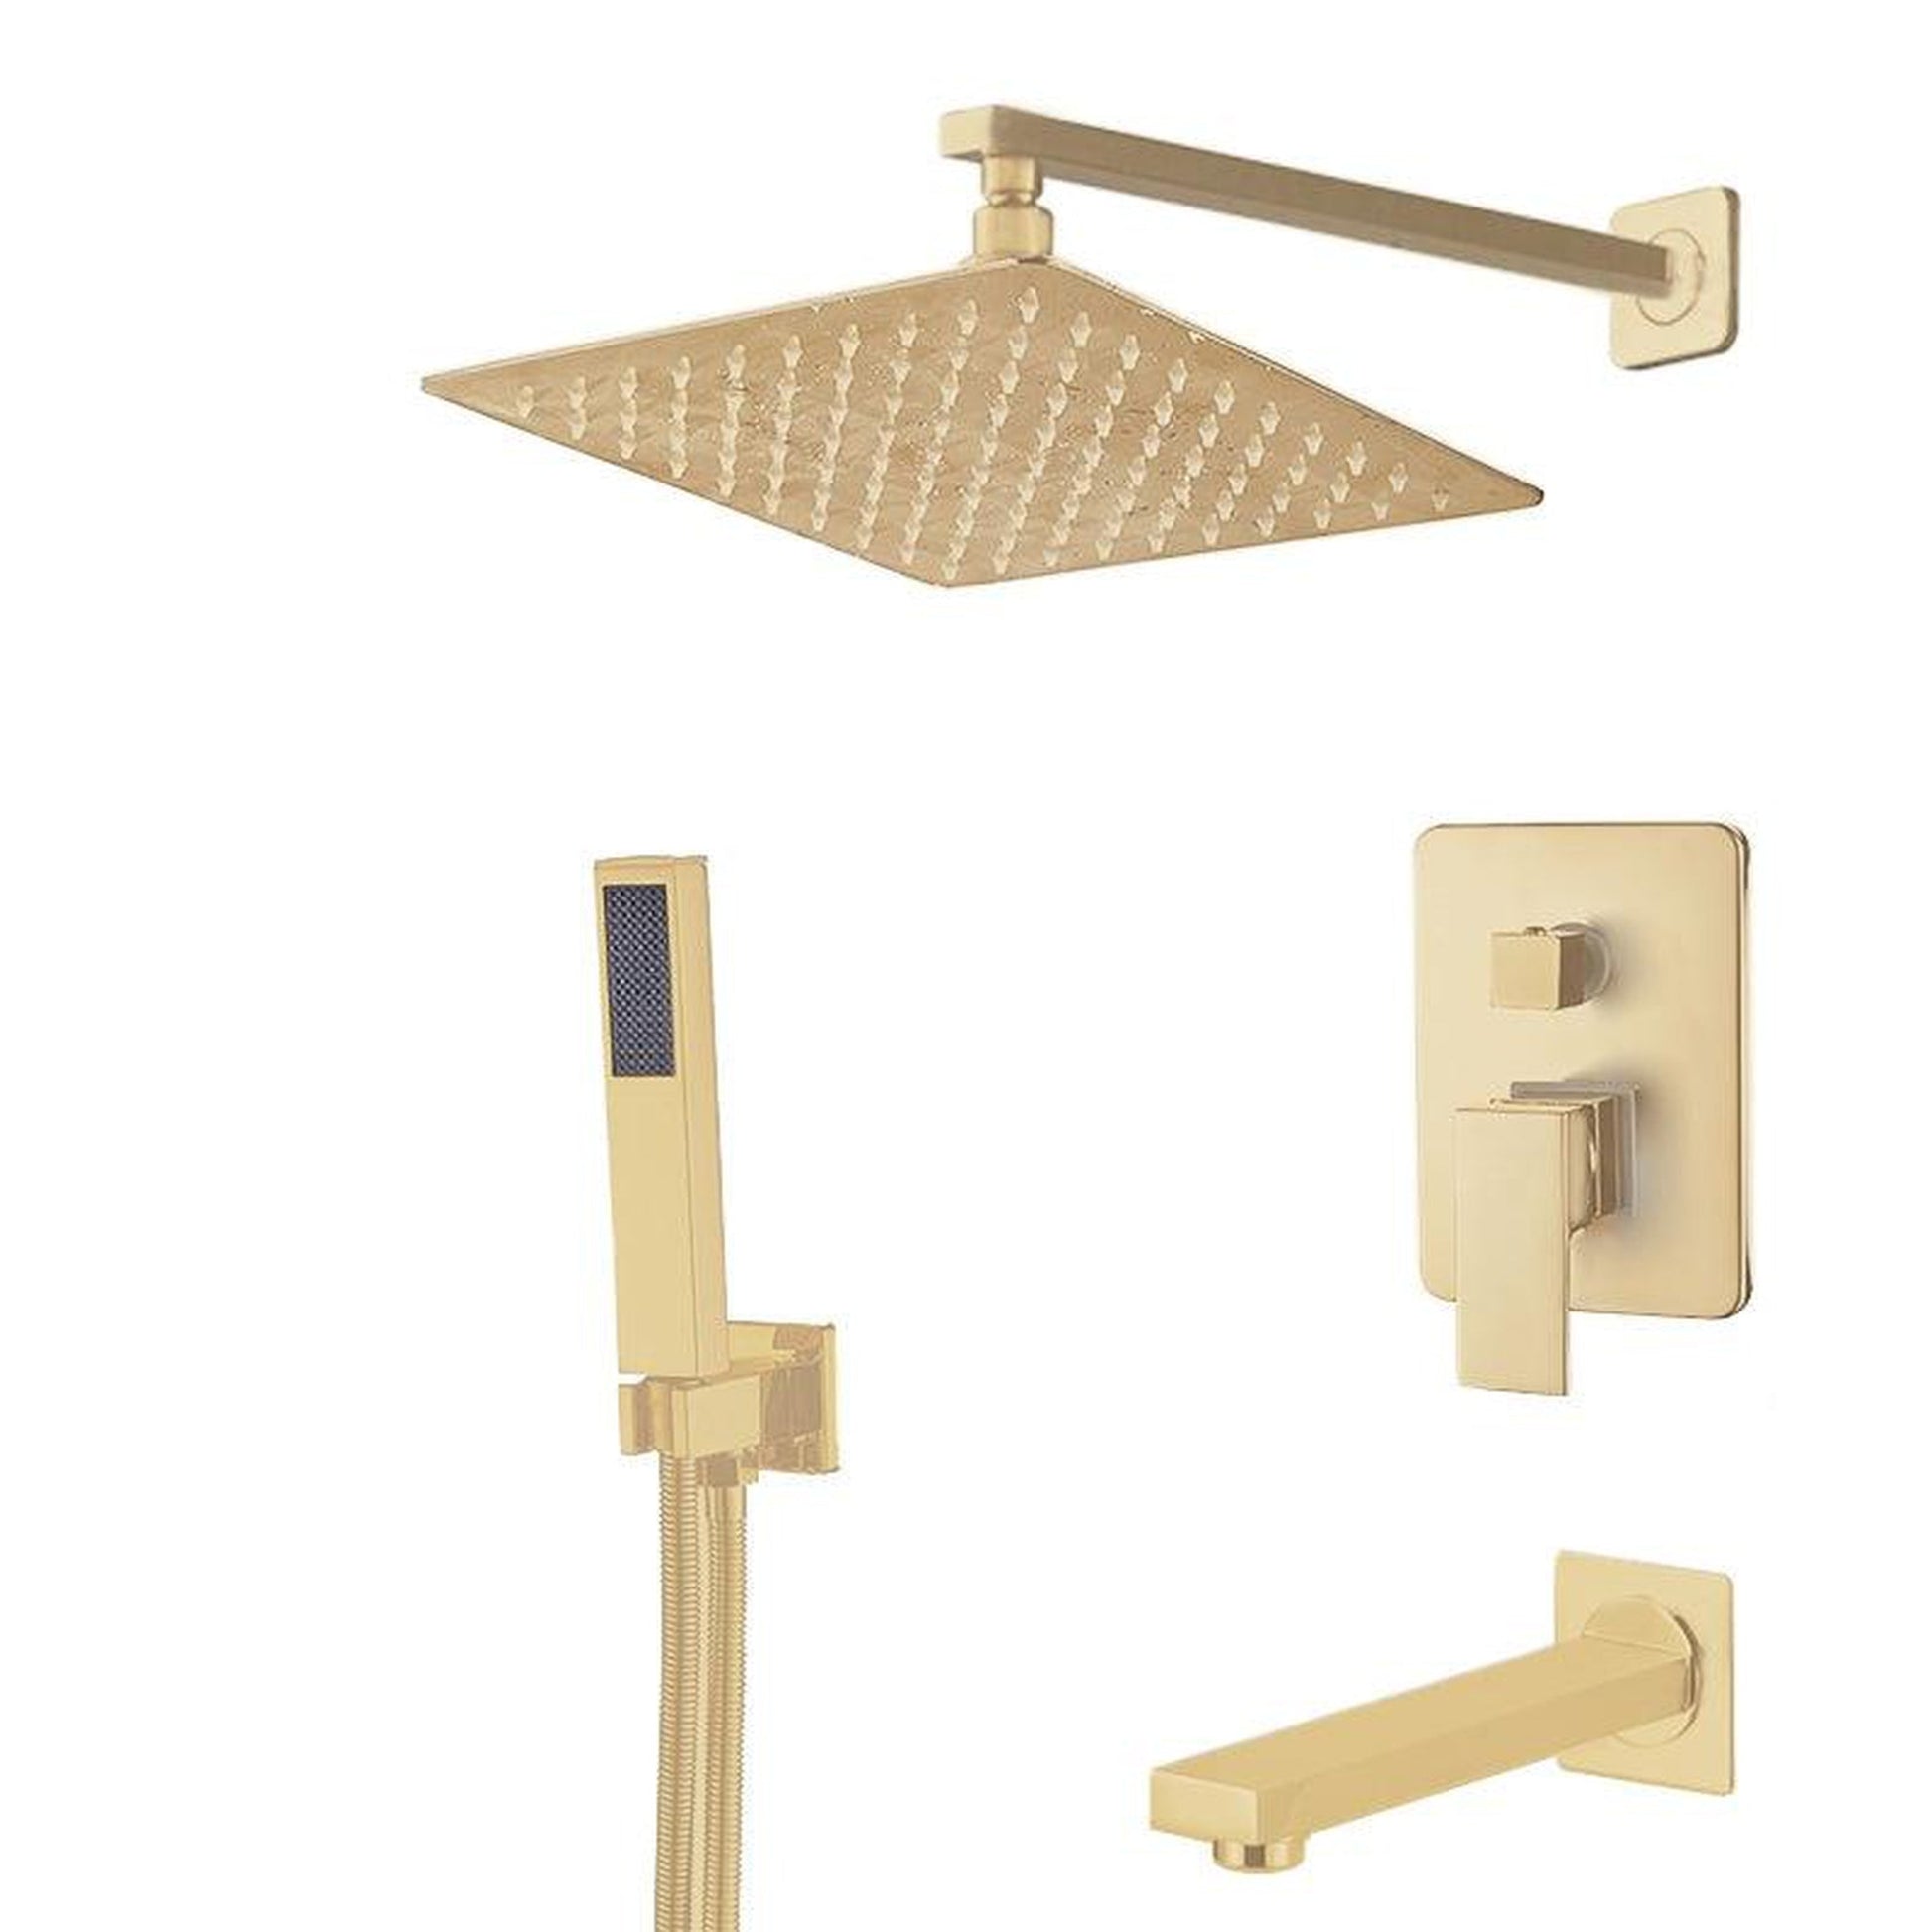 FontanaShowers Verona Creative Luxury 8" Gold Square Wall-Mounted 3-Way Single Handle Mixer Shower System With Hand Shower and Tub Spout